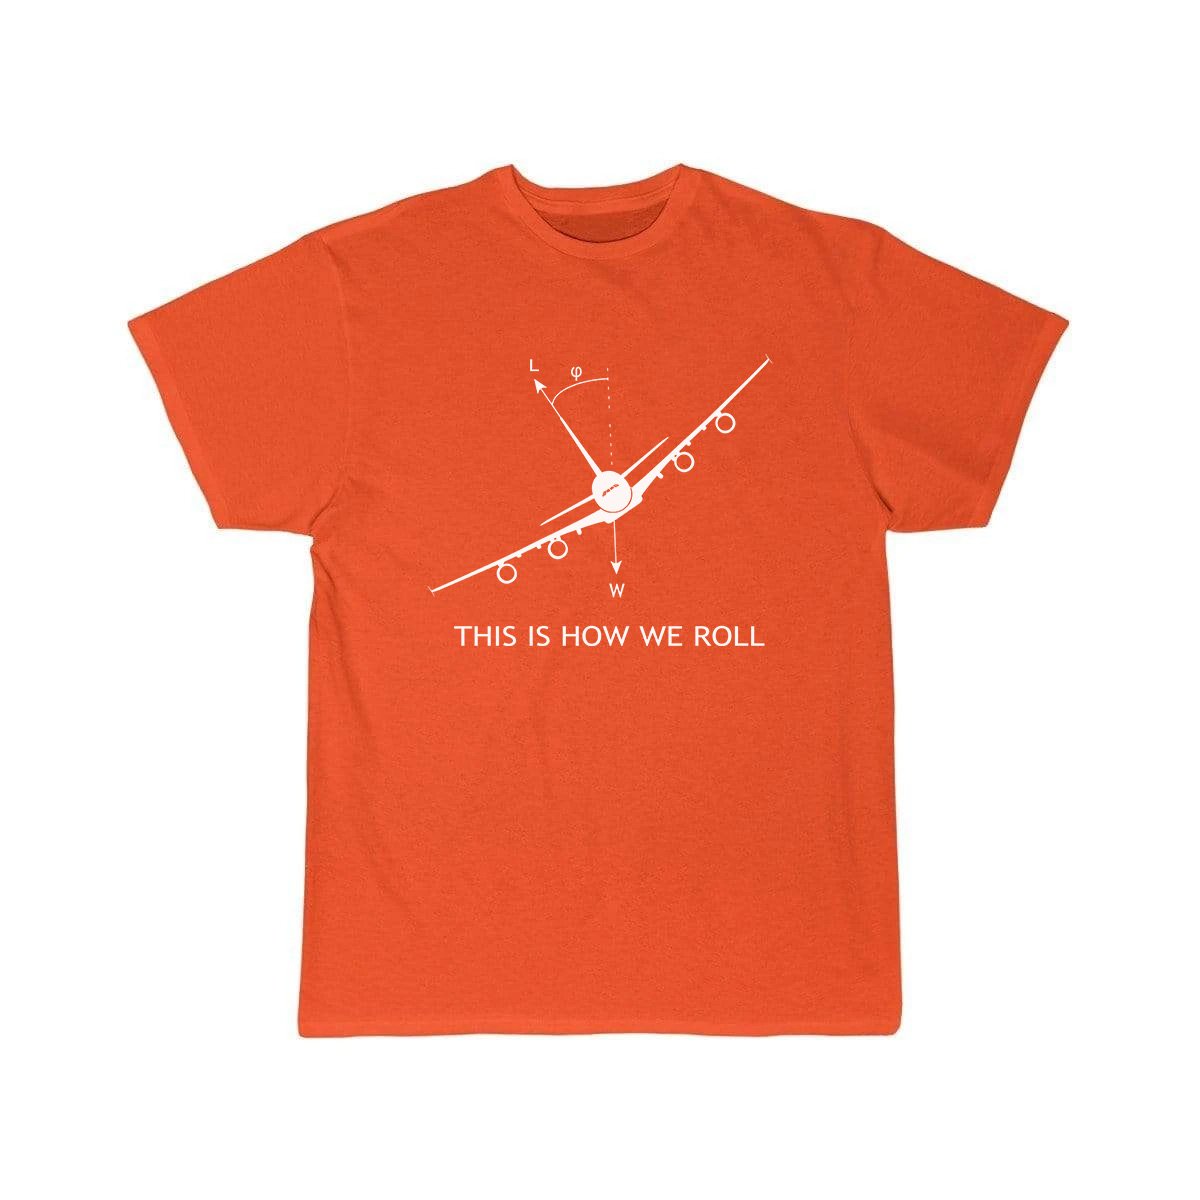 THIS IS HOW WE ROLL AIRBUS A380 DESIGNED T SHIRT45454777 THE AV8R